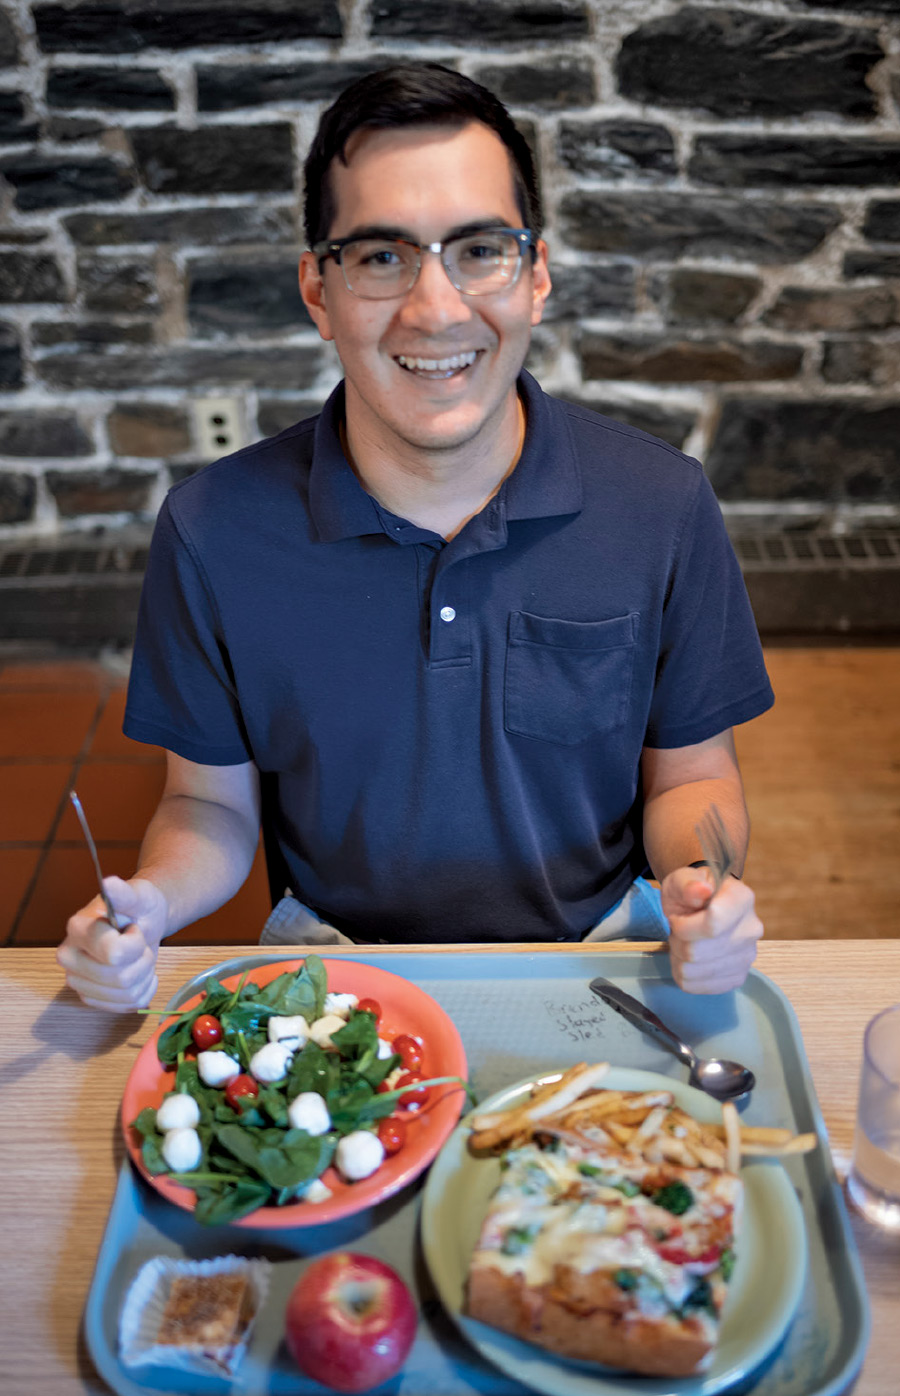 Alum Roy Greim '14 smiles and poses with utensils in hand, ready to enjoy salad, pizza, fruit, and fries.